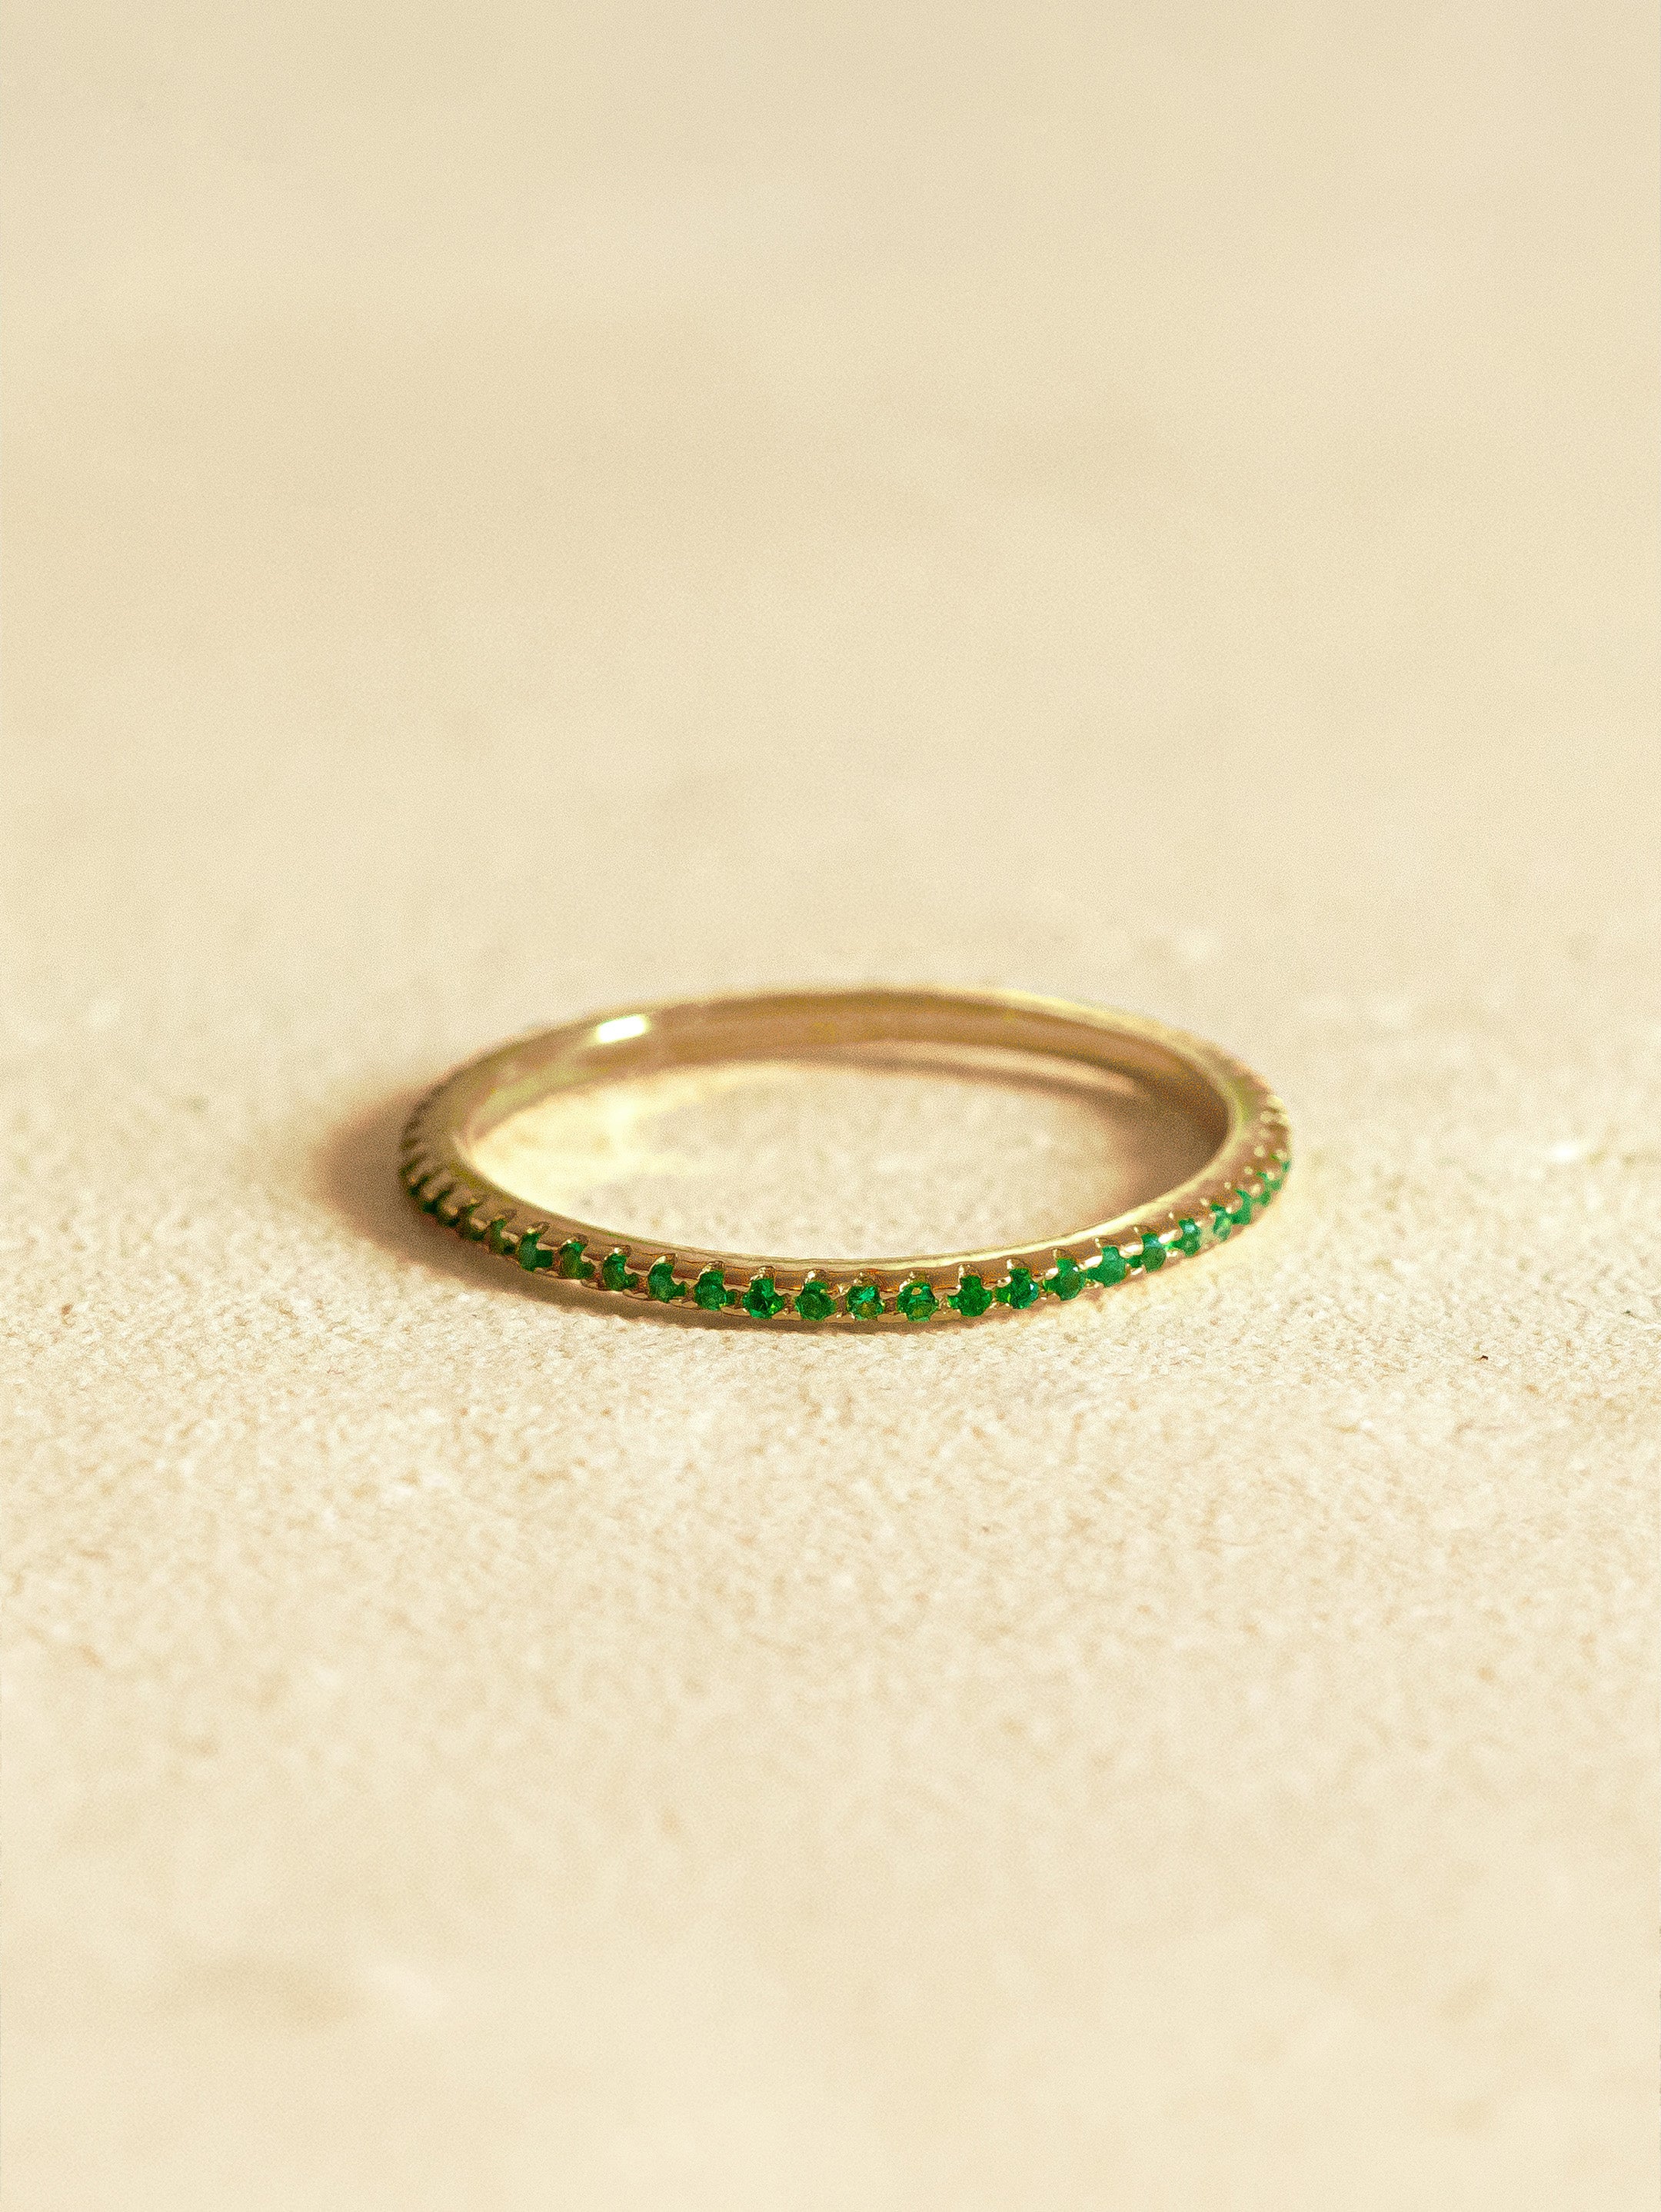 Gold Stacking Ring With Onyx Green Stones